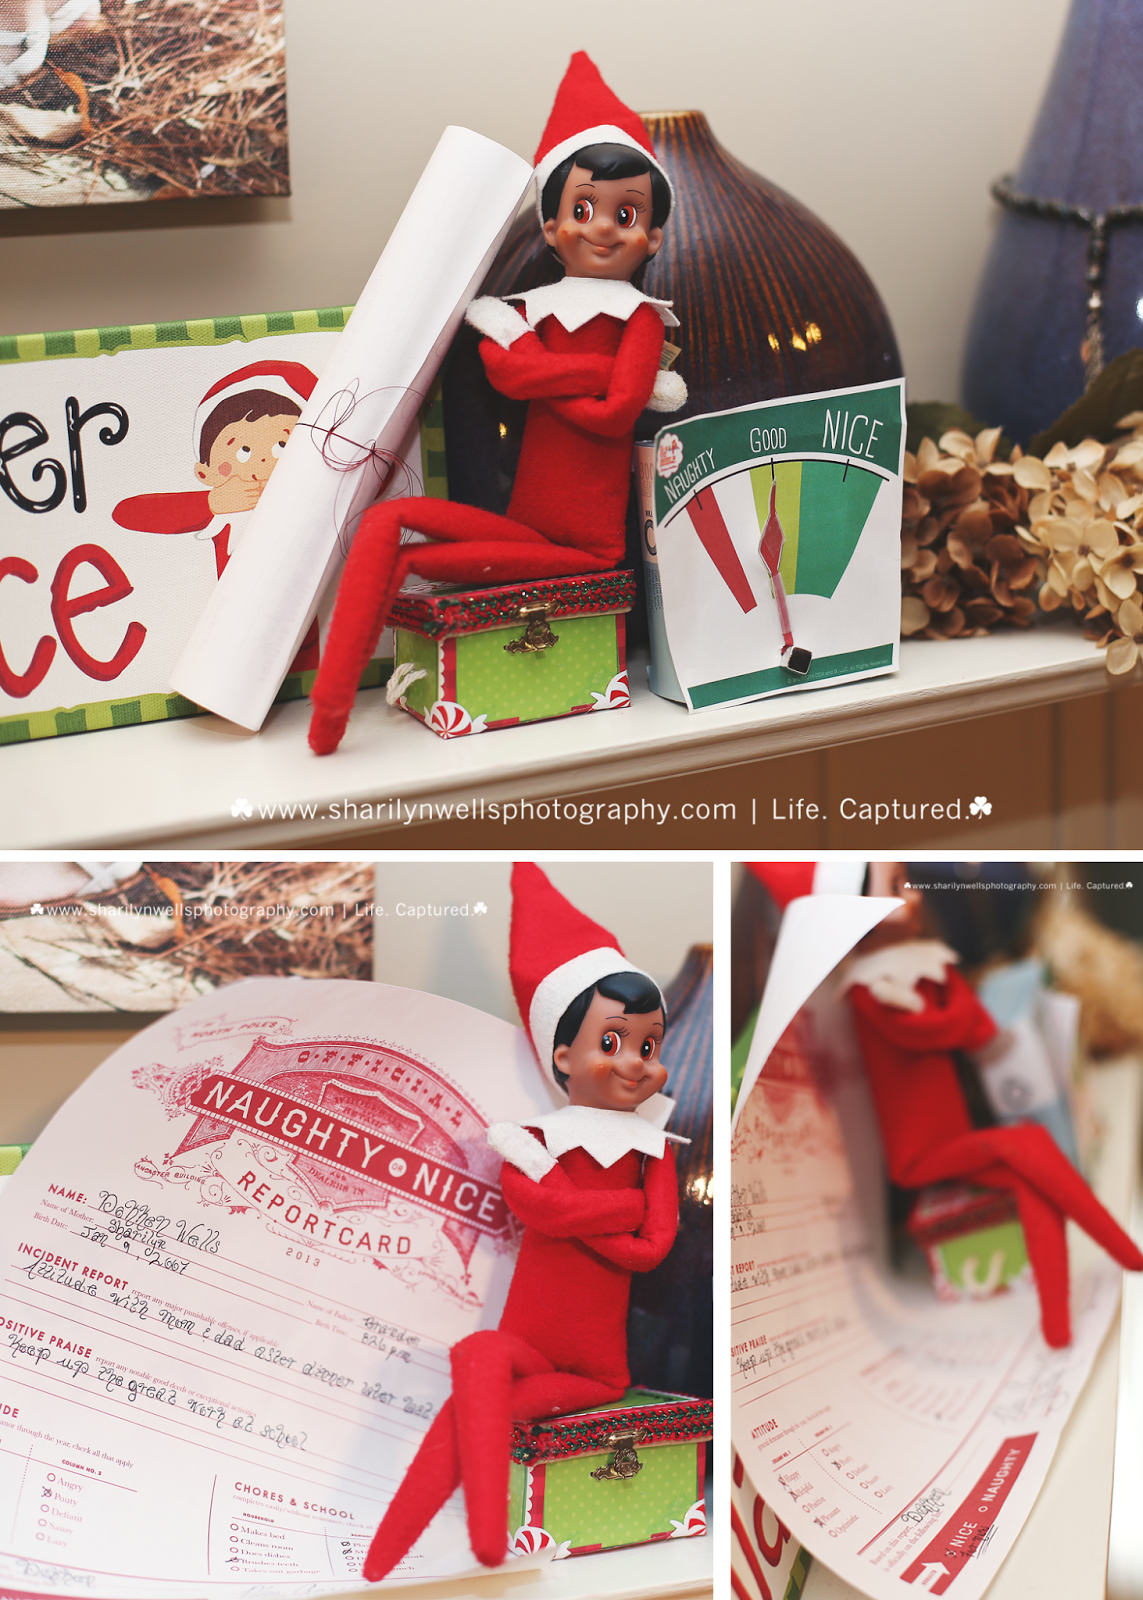 Sharilyn Wells Photography: 12 Ideas For Your Elf on the Shelf ...